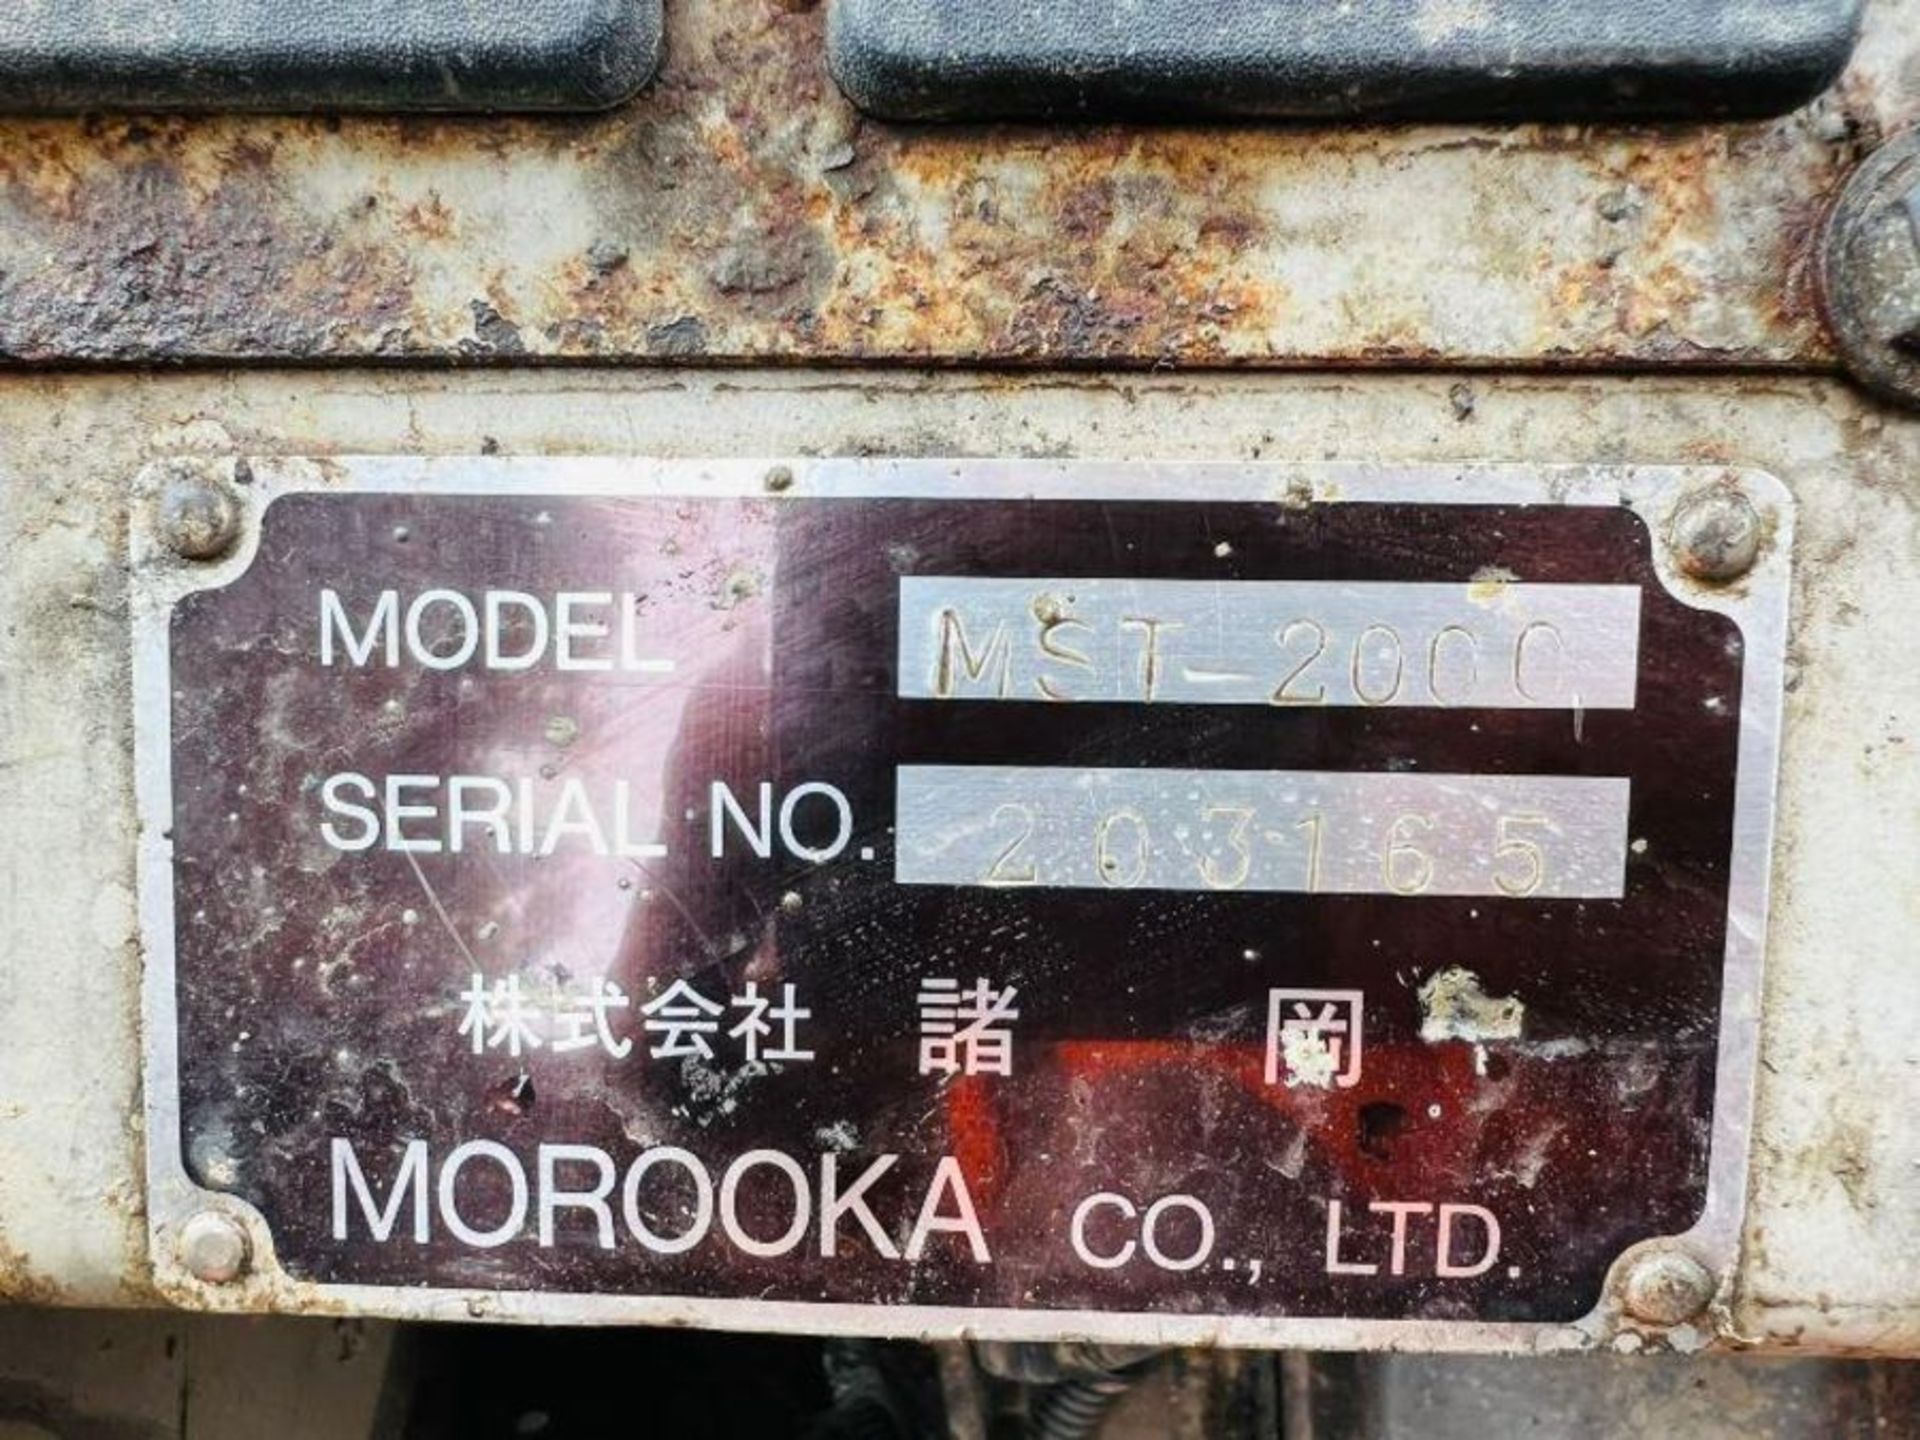 MOROOKA MST2000 TRACKED DUMPER C/W CONCRETE SHOOT & REVERSE CAMERA - RECENTLY SERVICED. - Image 10 of 13